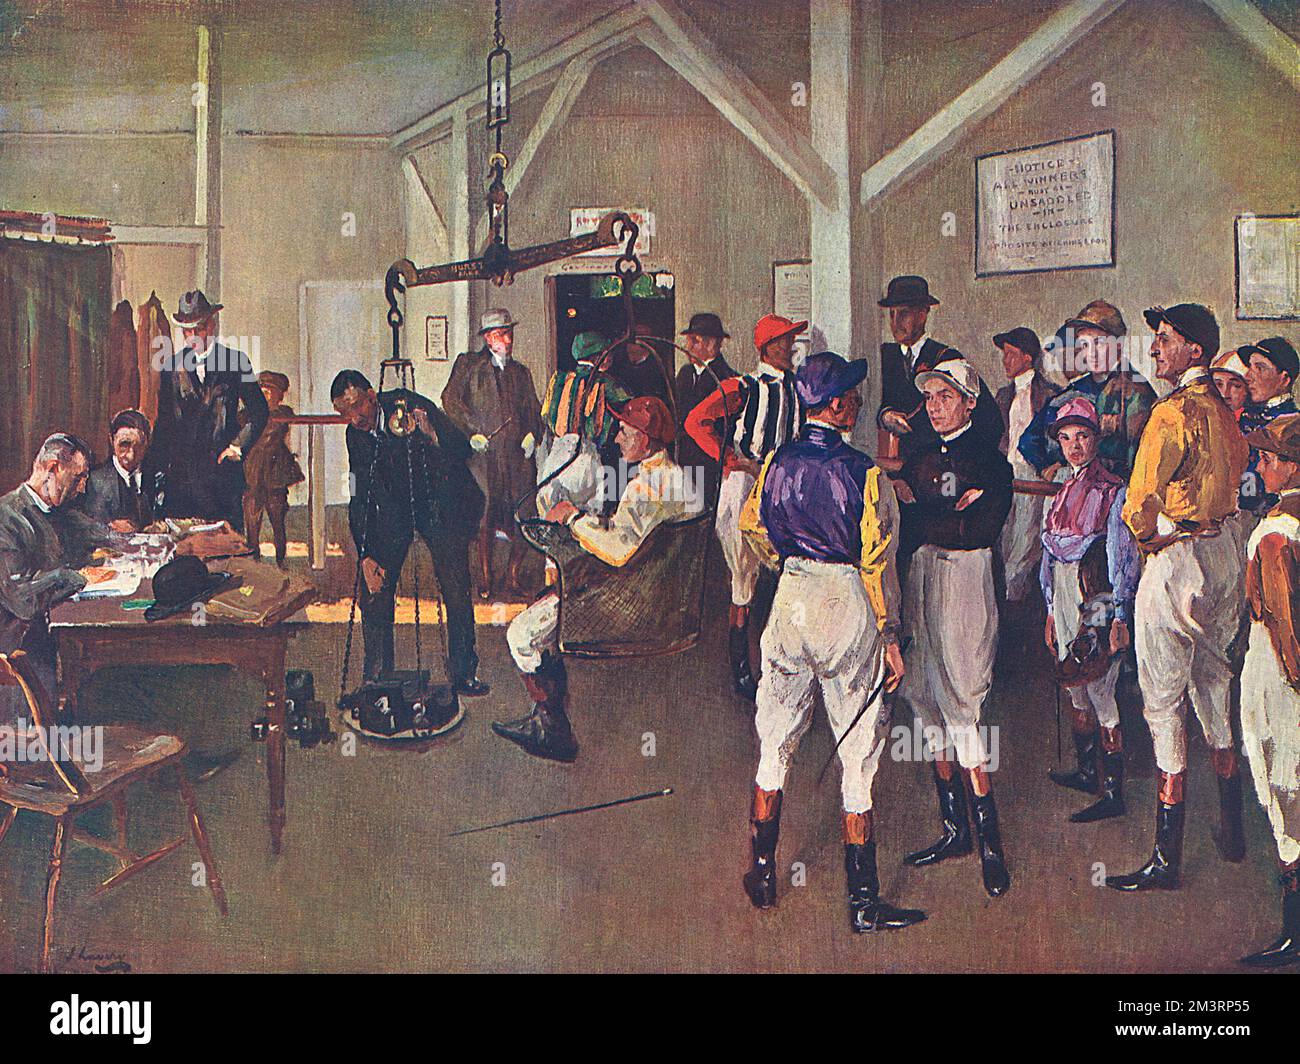 The Weighing Room at Hurst Park by John Lavery picturing famous jockeys of the day - from left, McLachlan, Steve Donoghue (in the scales), Bullock, Smirke, Weston, Beary, Pat Donoghue, R. Jones, V.Smythe, Carslake, Collins, Wragg and McLachlan junior.  1925 Stock Photo